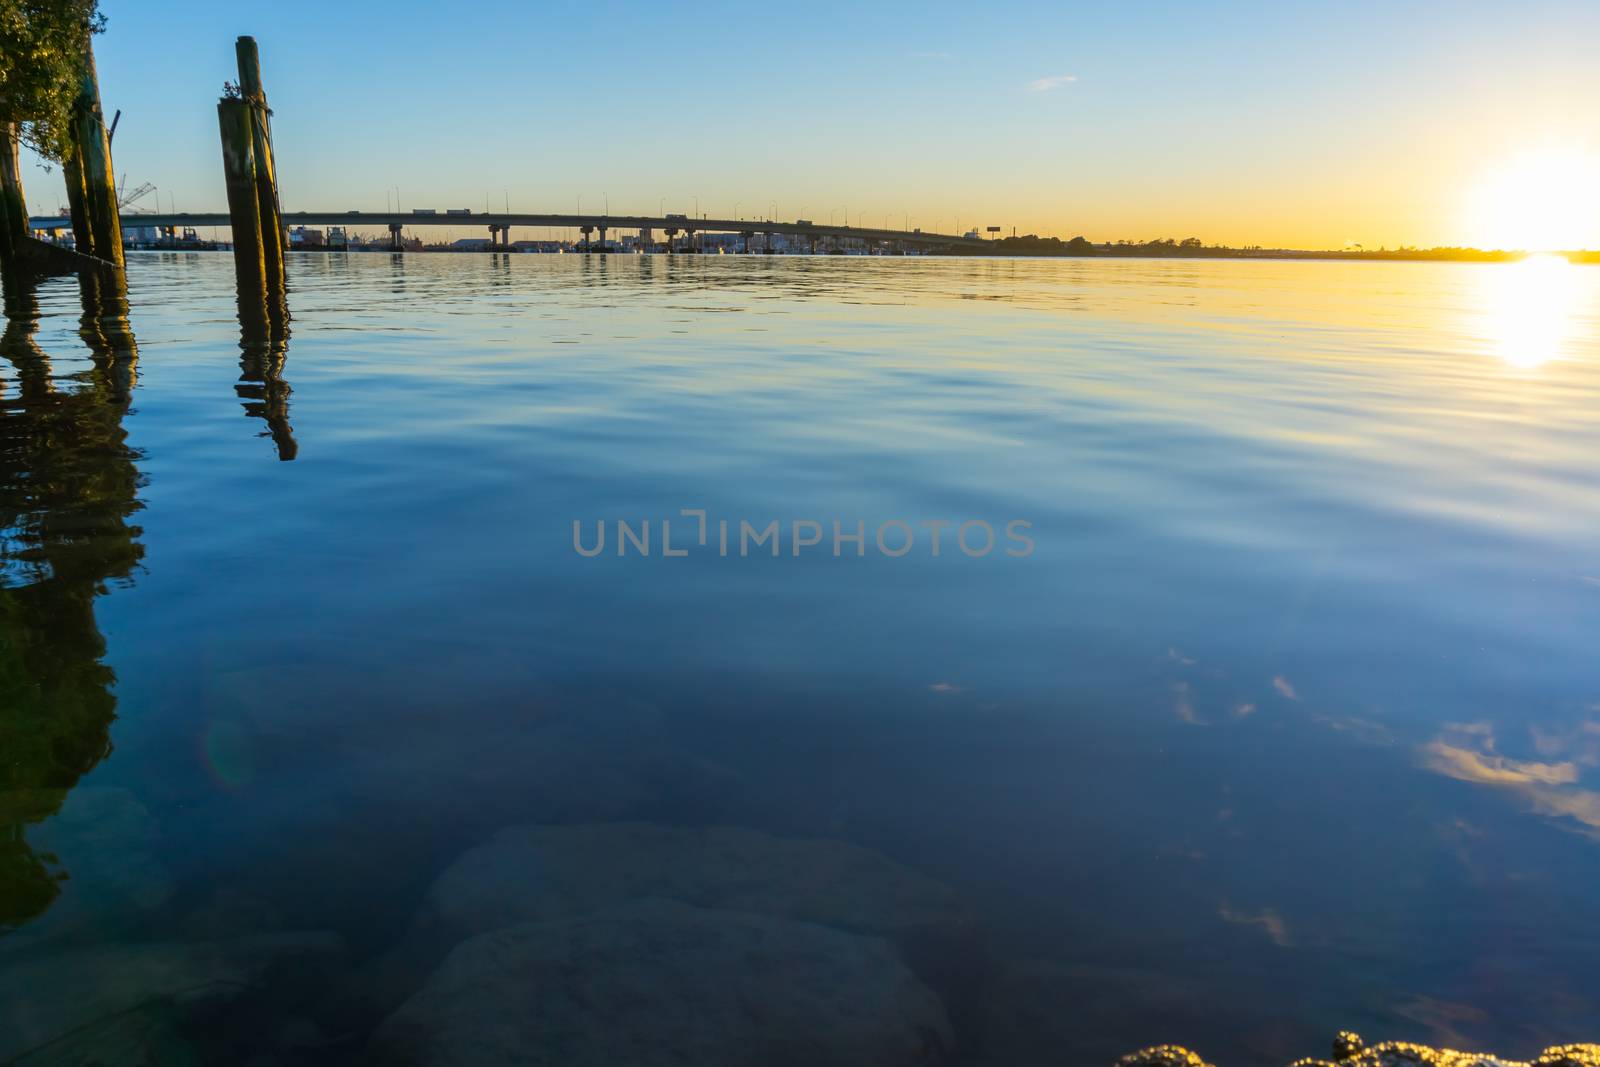 Tauranga Harbour Bridge arches across the harbour in distance ba by brians101